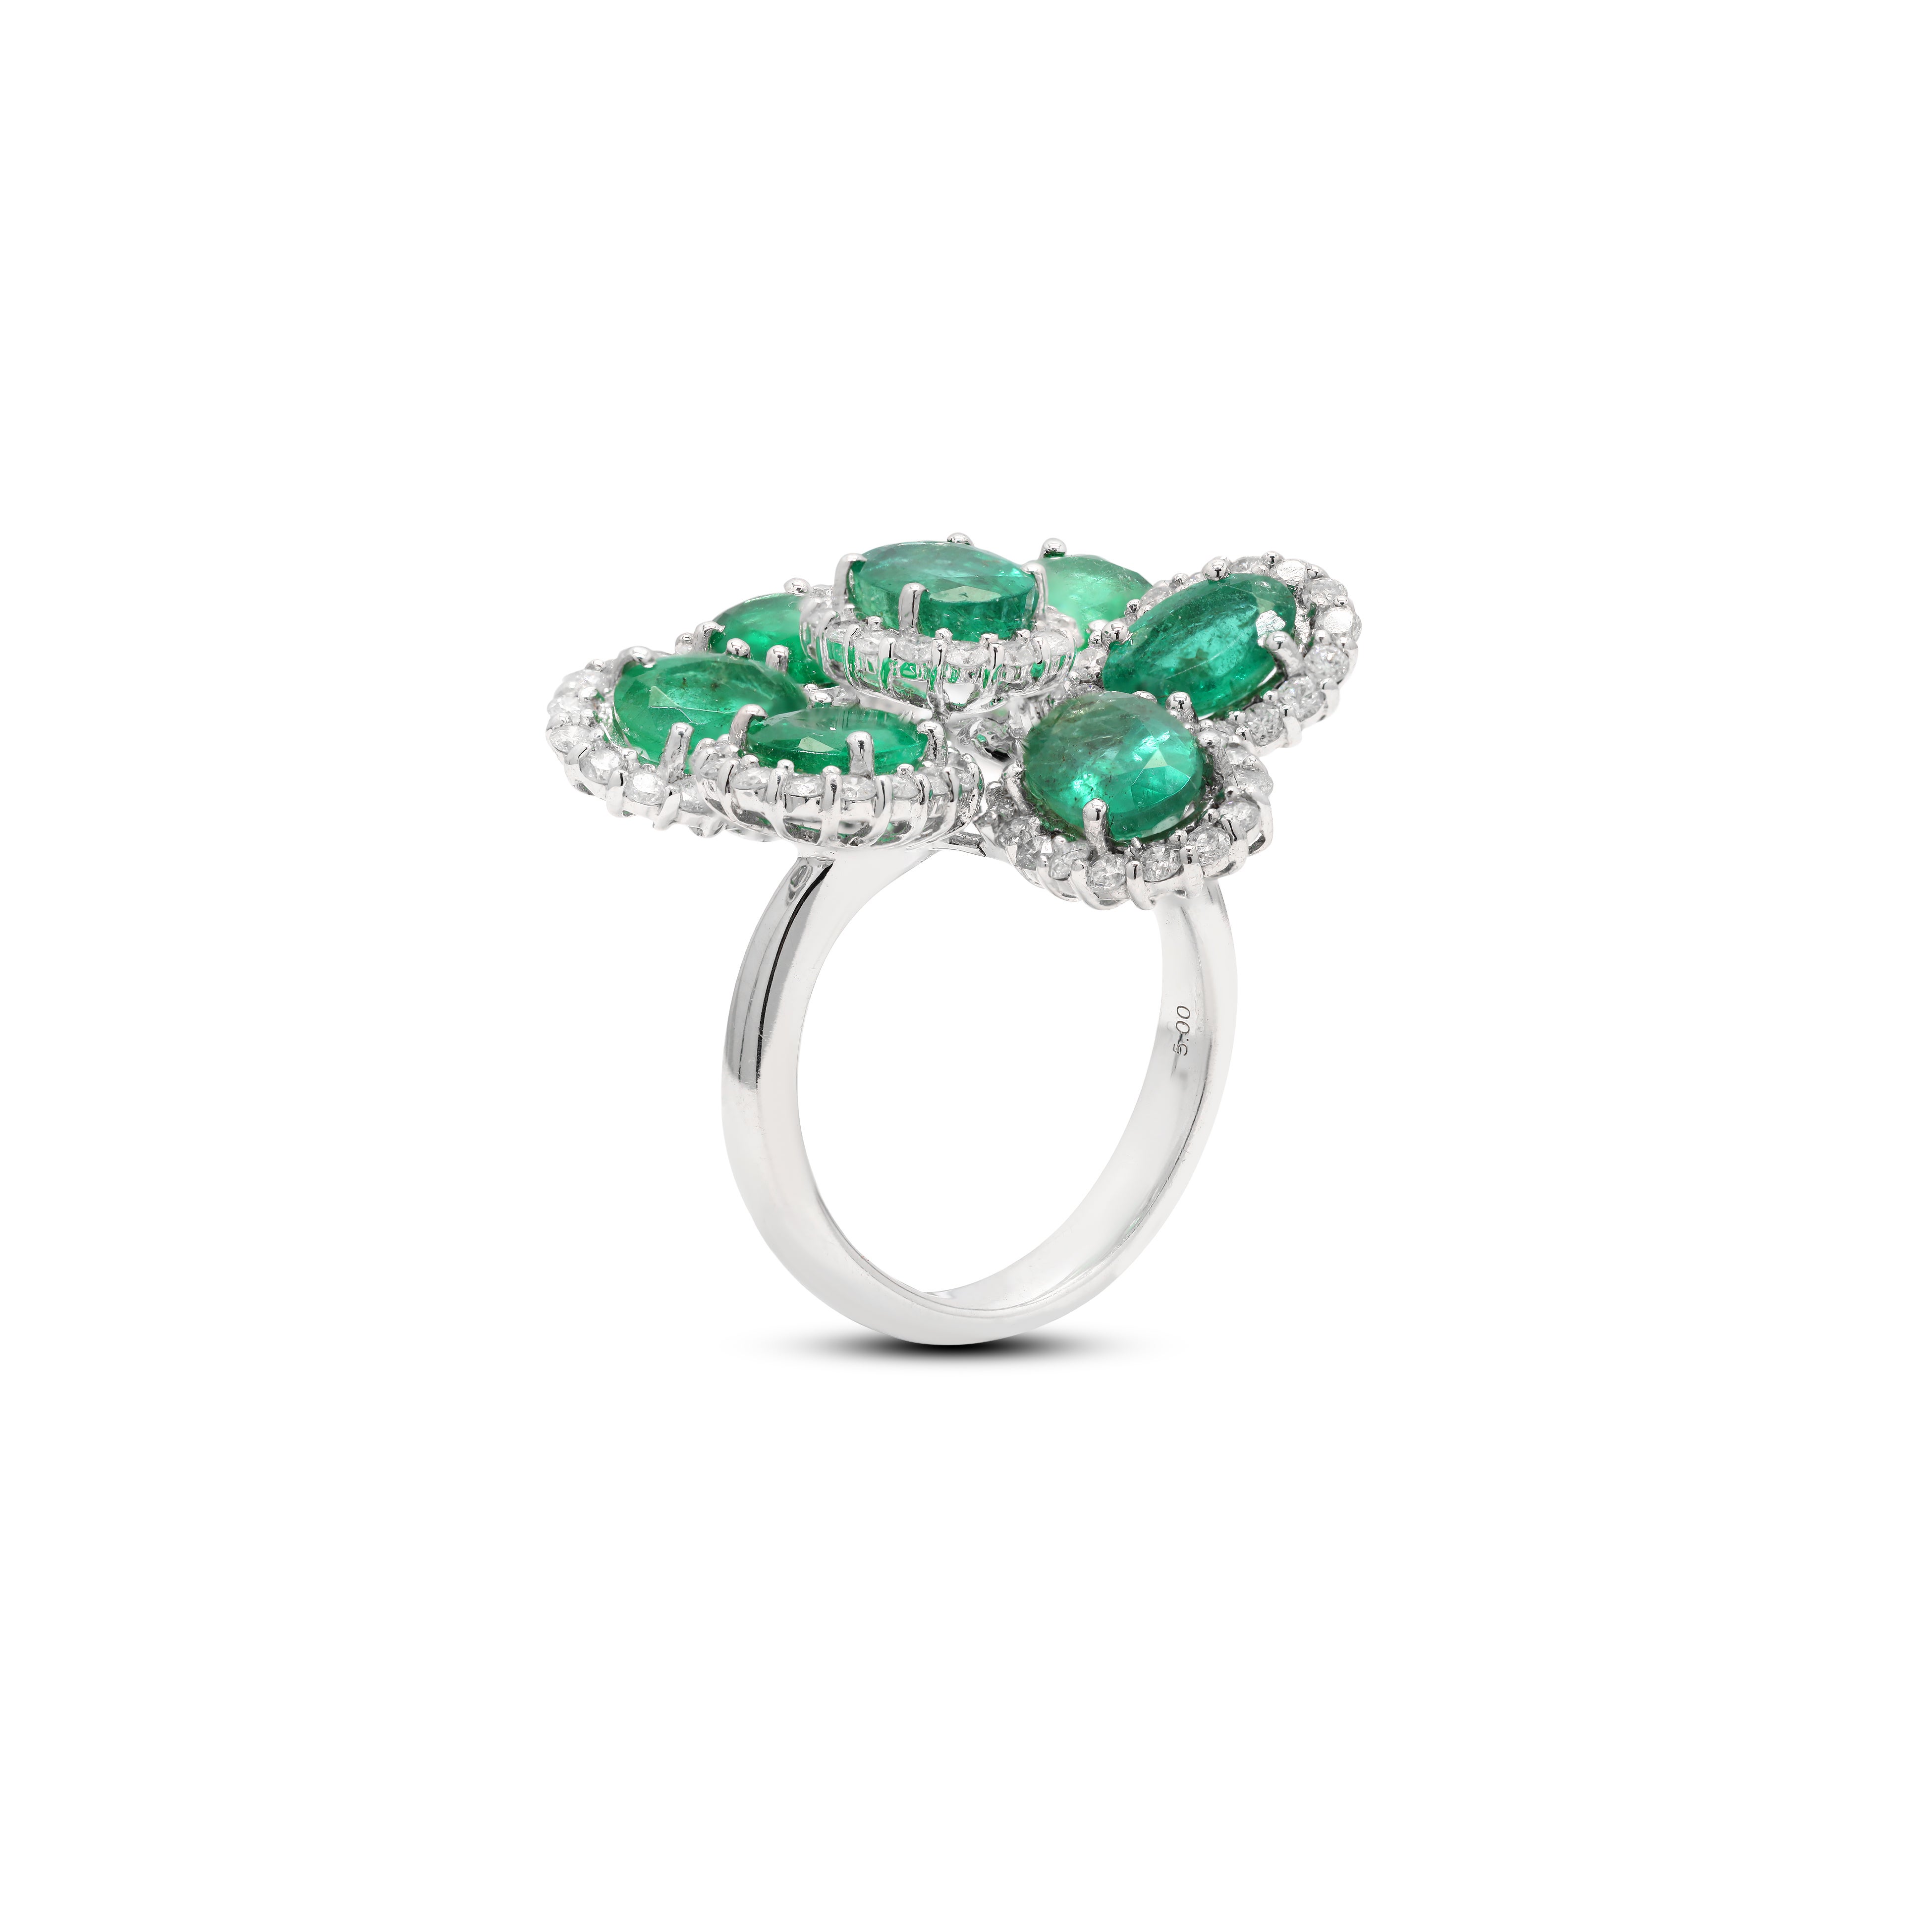 For Sale:  Statement 5 ct Emerald Flower Ring with Halo Diamonds in 14 Karat White Gold 3